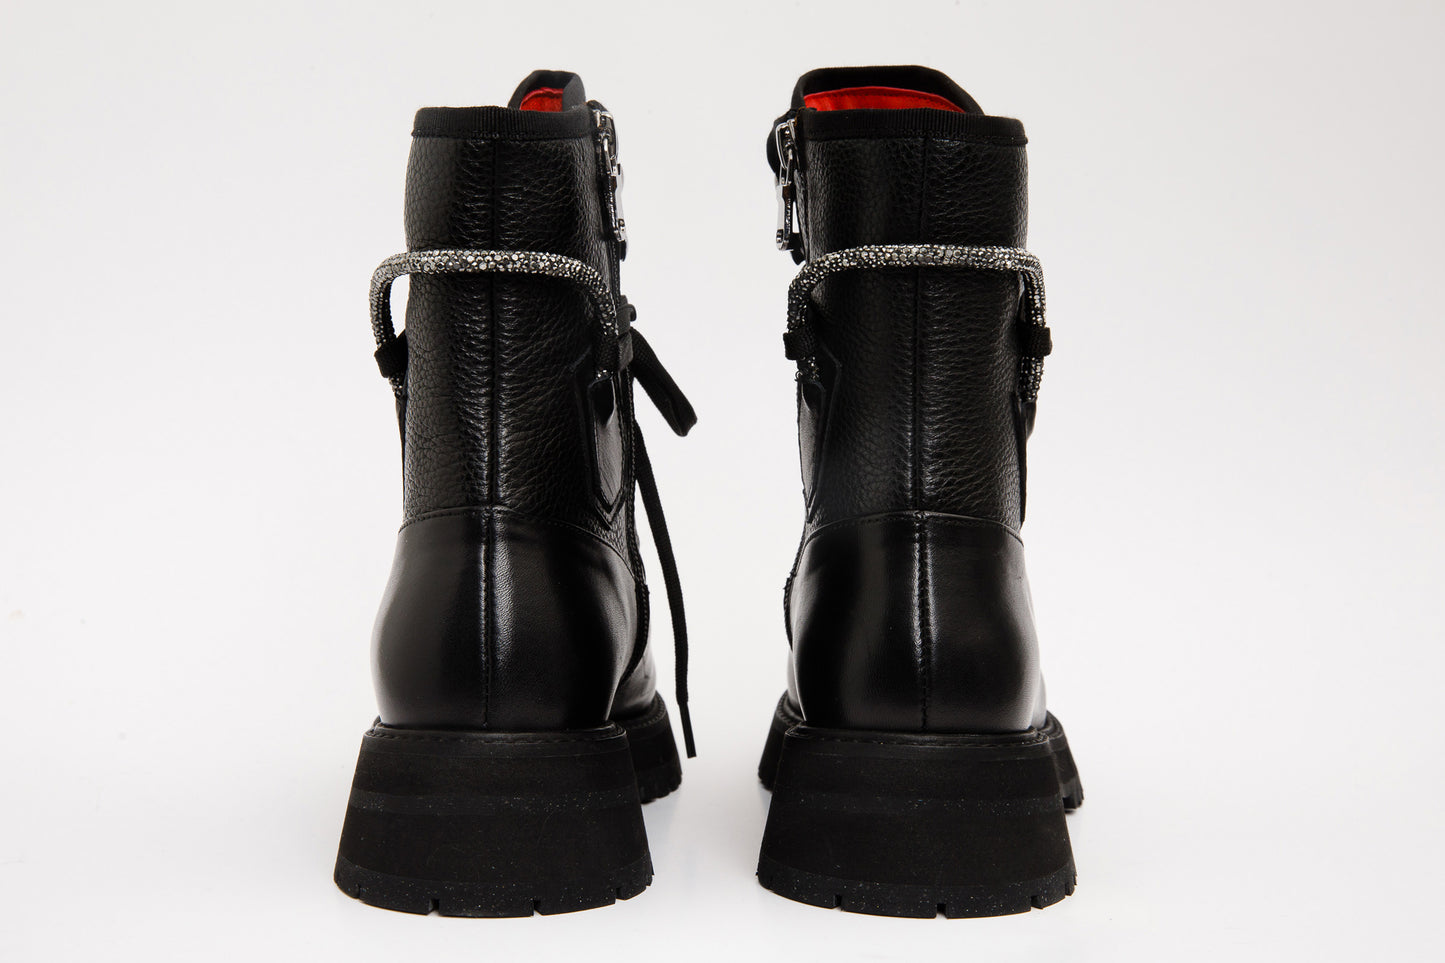 The Arata Black Leather Lace-Up Ankle Women Boot With a Side Zipper